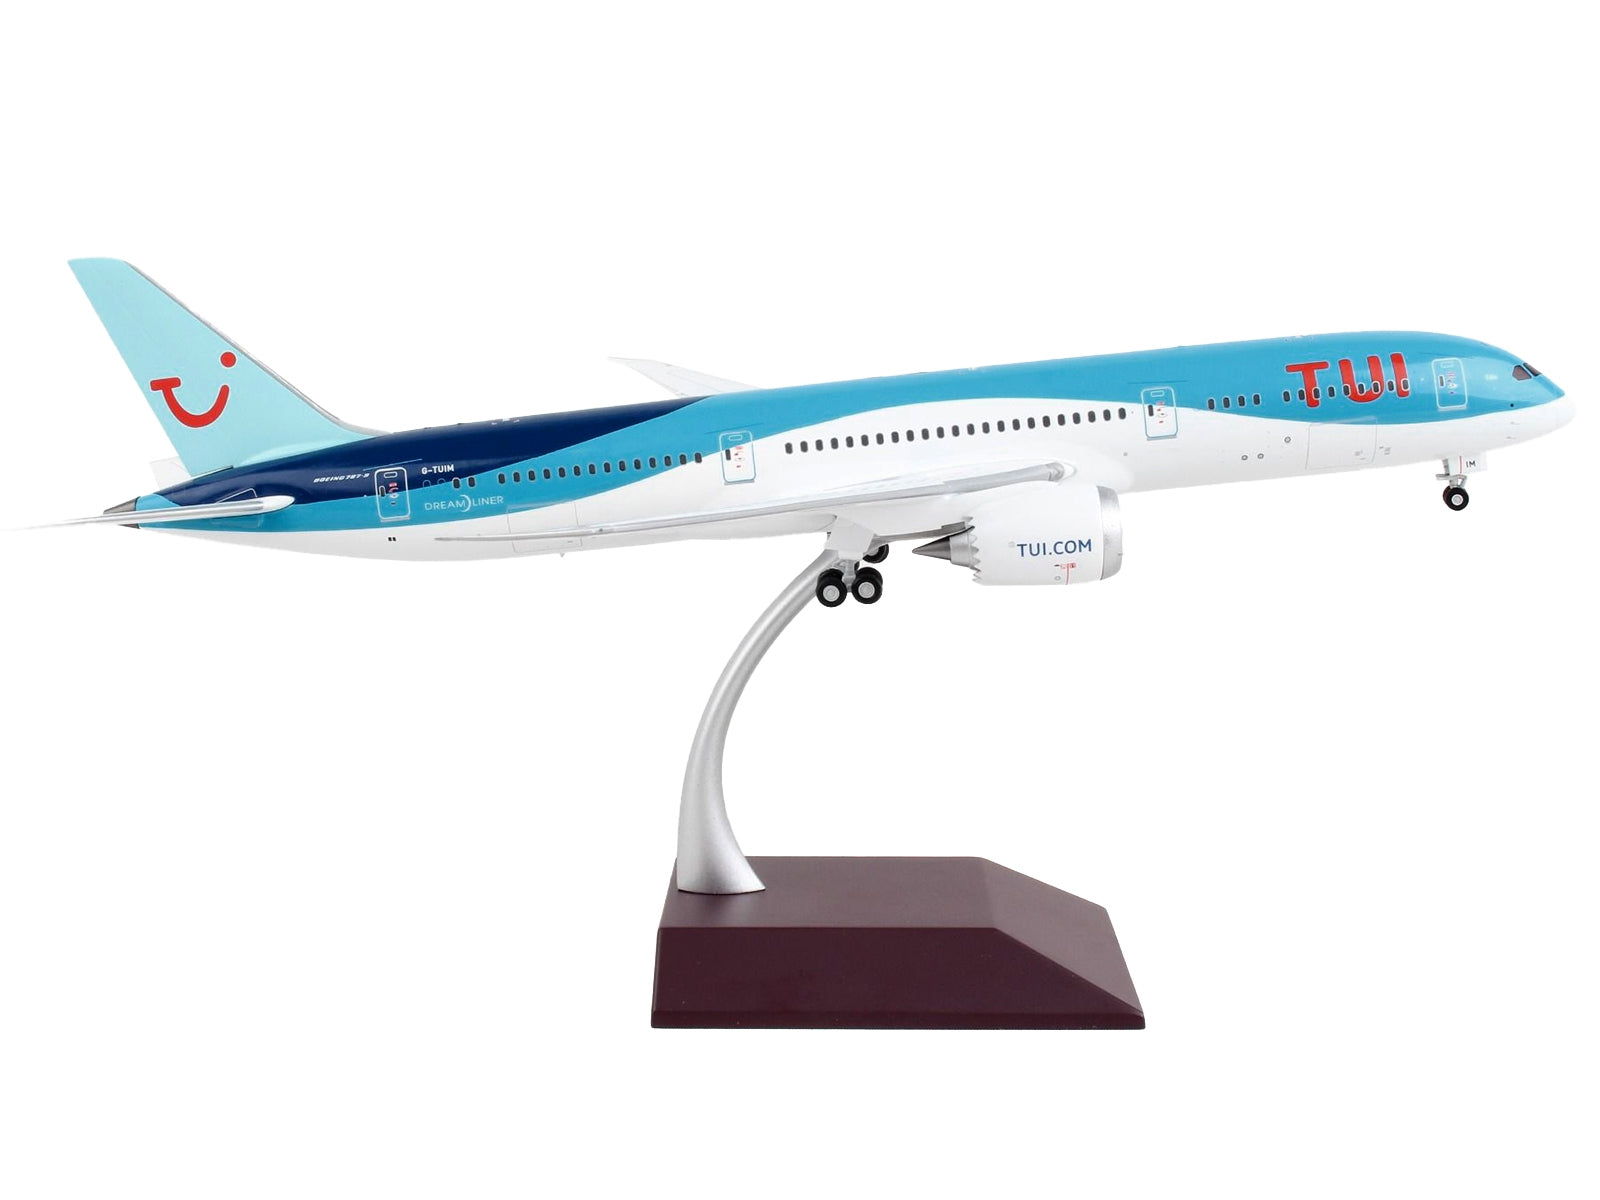 Boeing 787-9 Commercial Aircraft "TUI Airways" Blue and White "Gemini 200" Series 1/200 Diecast Model Airplane by GeminiJets